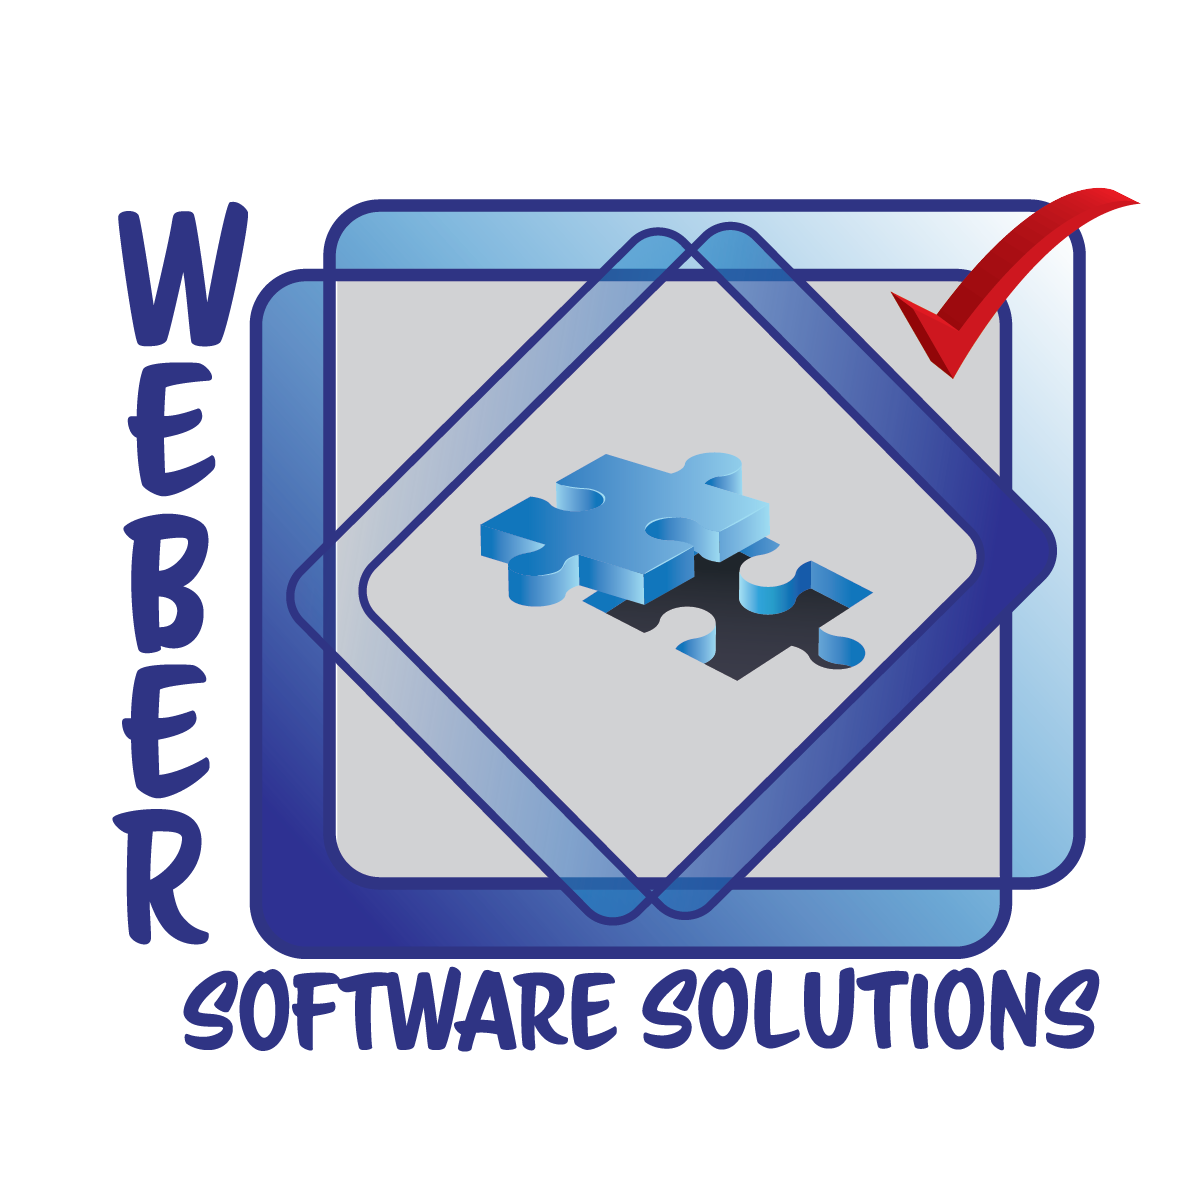 Weber Software Solutions Logo - including text,
                 puzzle pieces, and checkmark.